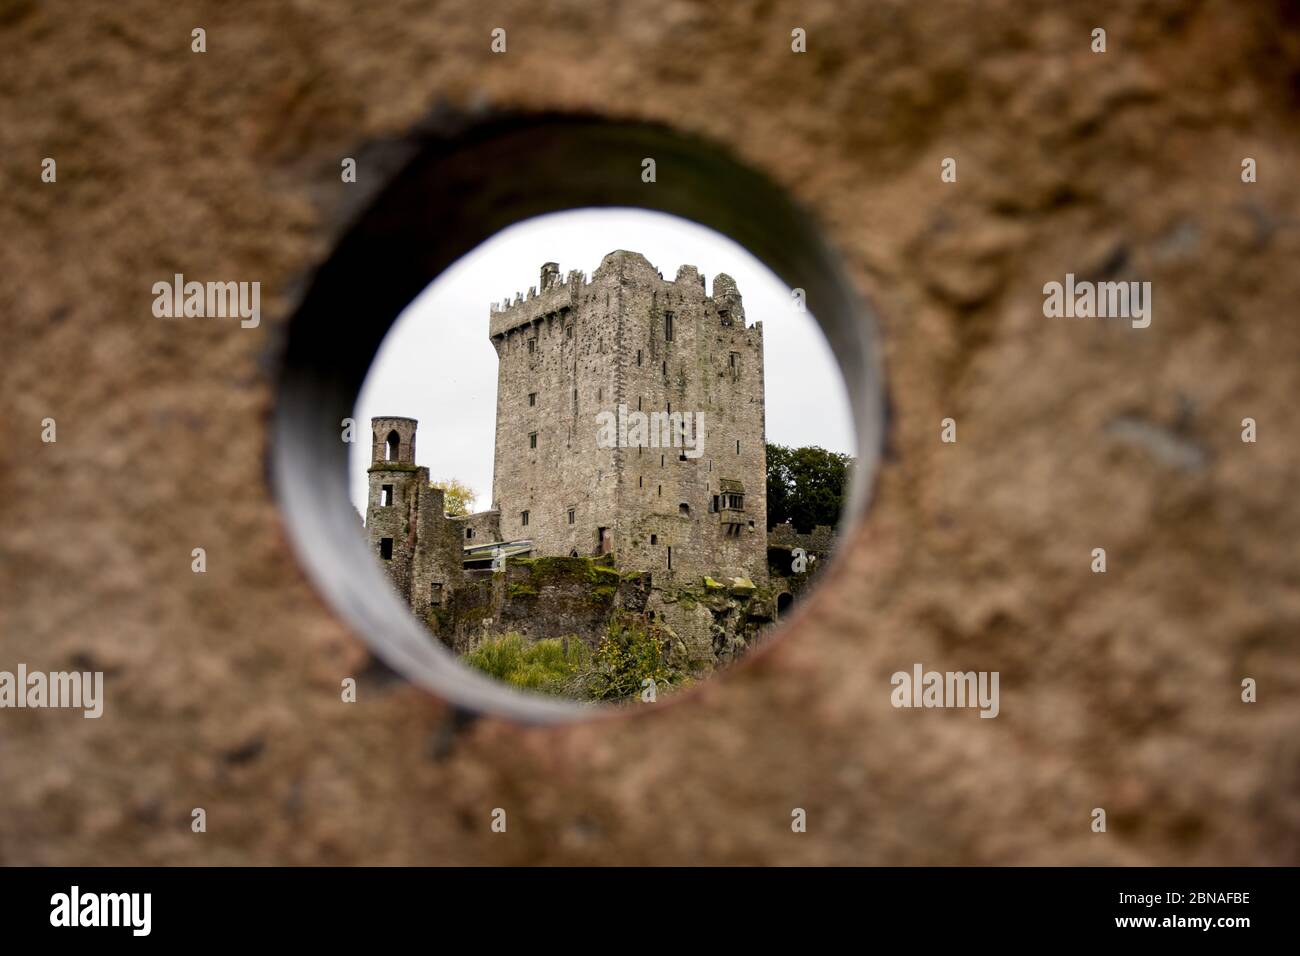 Beautiful shot of Blarney Castle in Ireland seen through the concrete hole Stock Photo